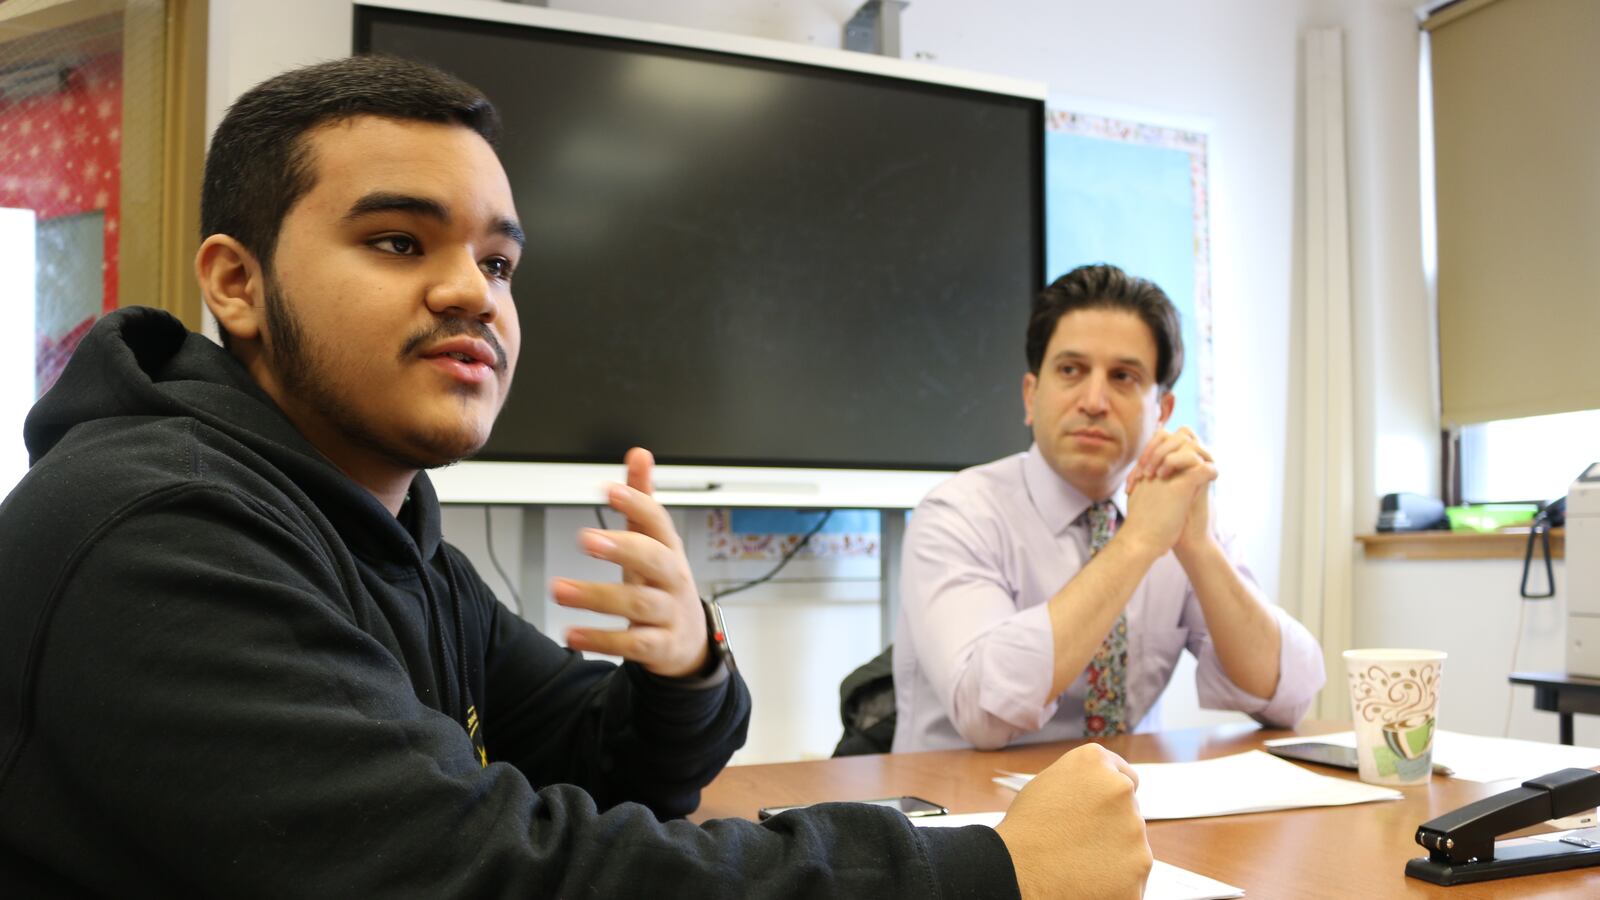 Lisandro Mayancela, a student at Brooklyn Law Tech and member of the Student Voice Collaborative, hosts visitors at his school.